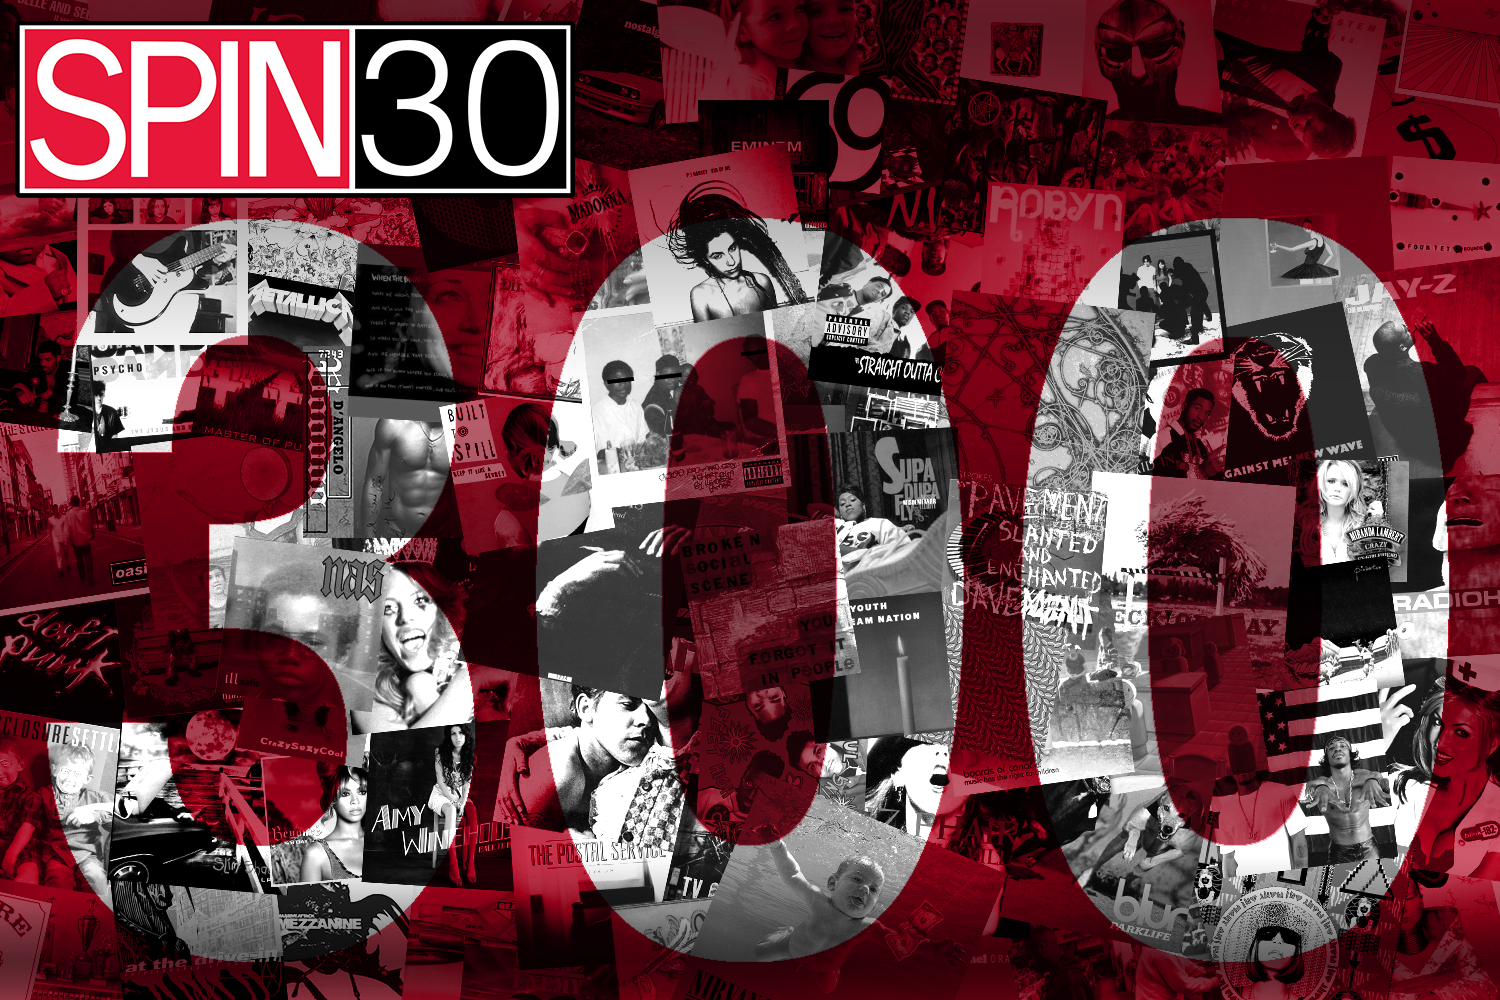 The 300 Best Albums of the Past 30 Years (1985-2014) - SPIN